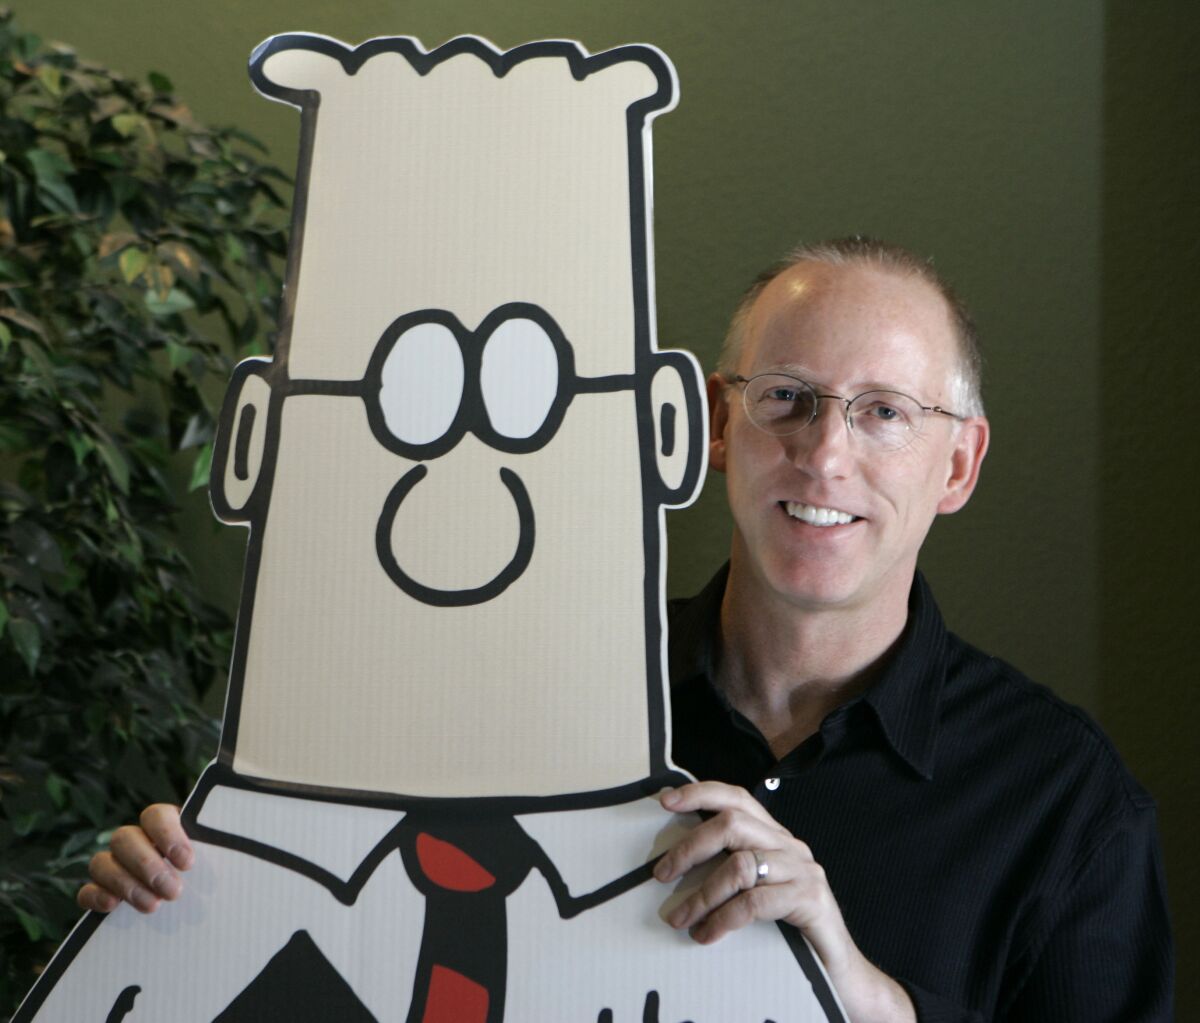 A balding man in glasses stands with his hands on the shoulders of a cutout cartoon character